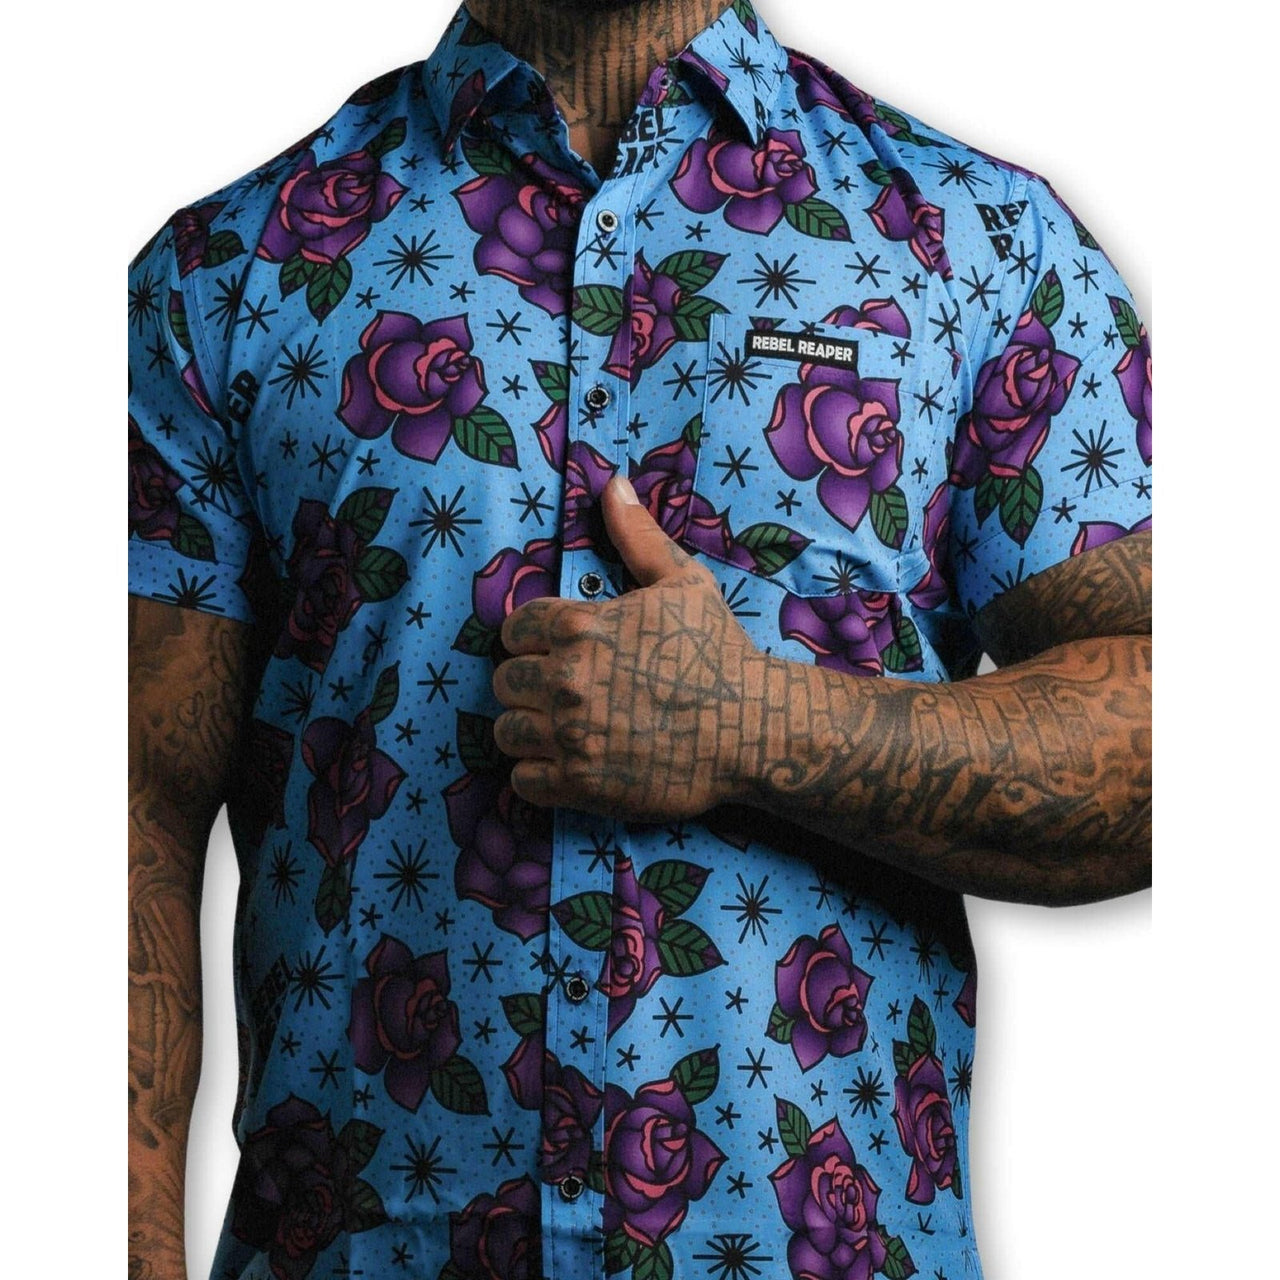 Blue Flash of Roses Shirt - Rebel Reaper Clothing Company Button Up Shirt Men's